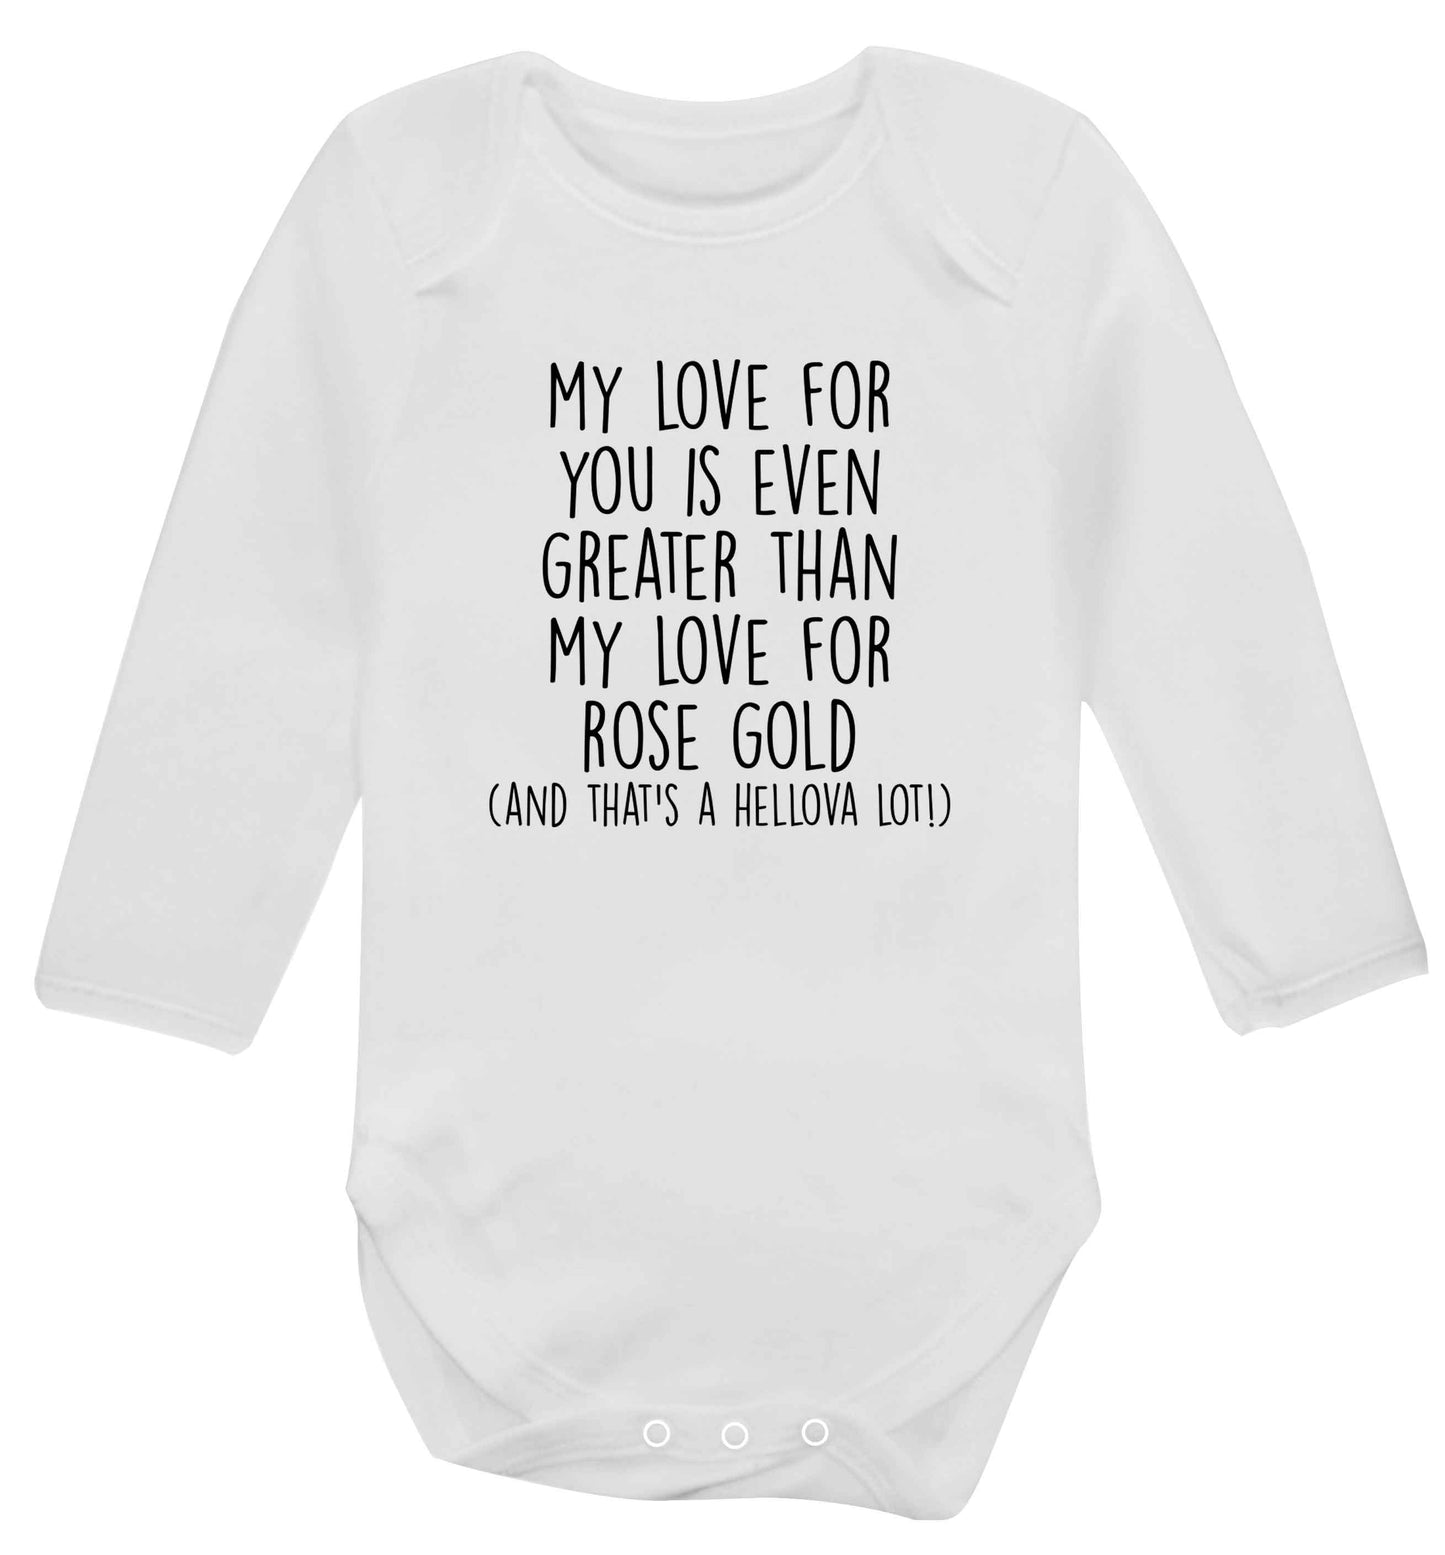 My love for you is even greater than my love for rose gold (and that's a hellova lot) baby vest long sleeved white 6-12 months